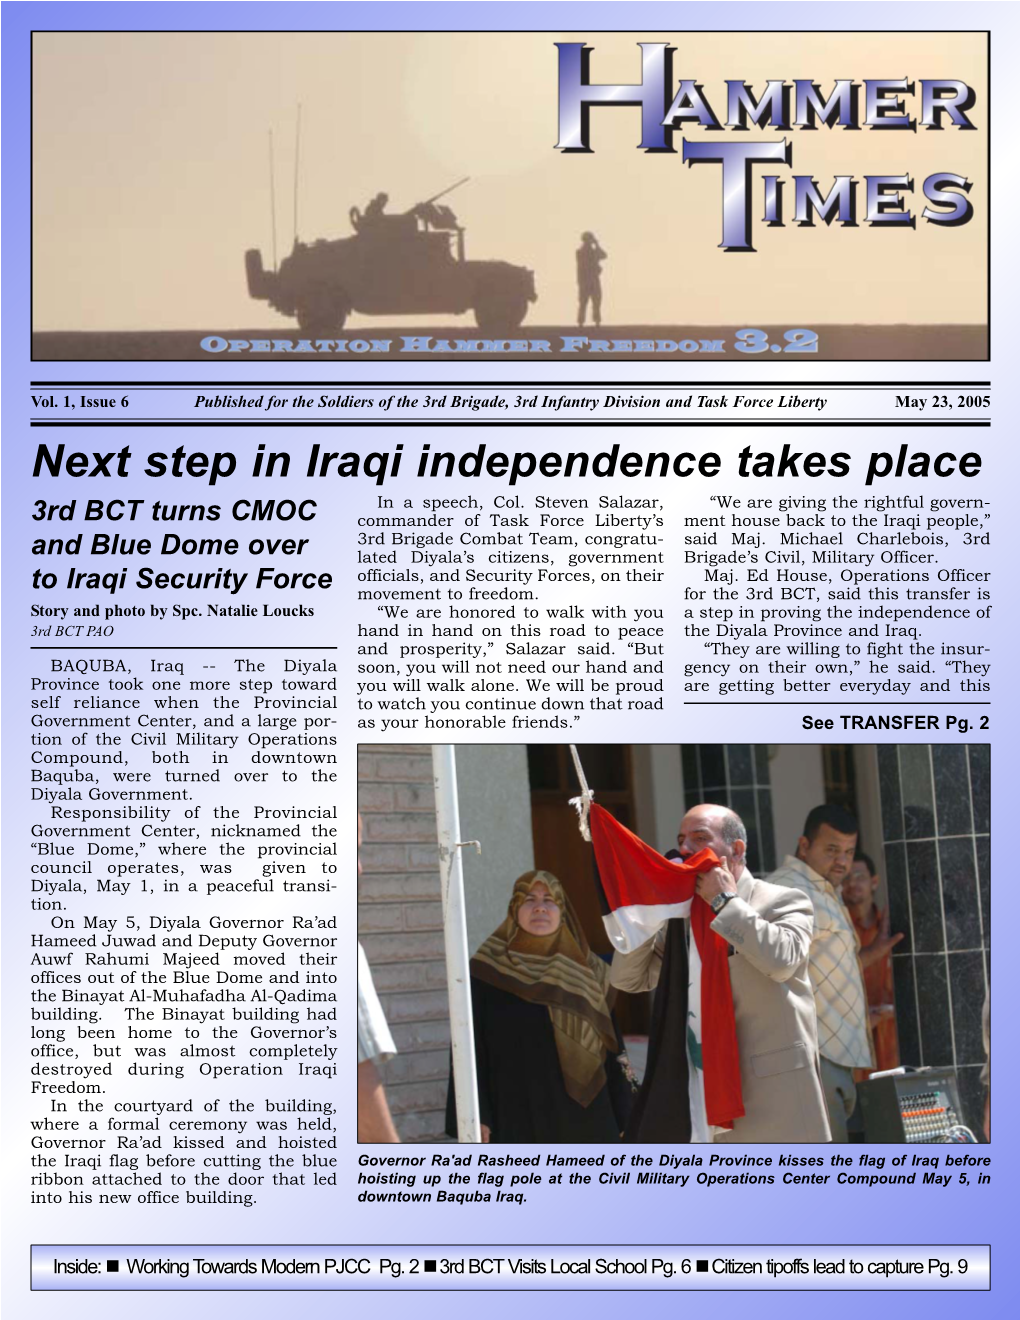 Next Step in Iraqi Independence Takes Place in a Speech, Col